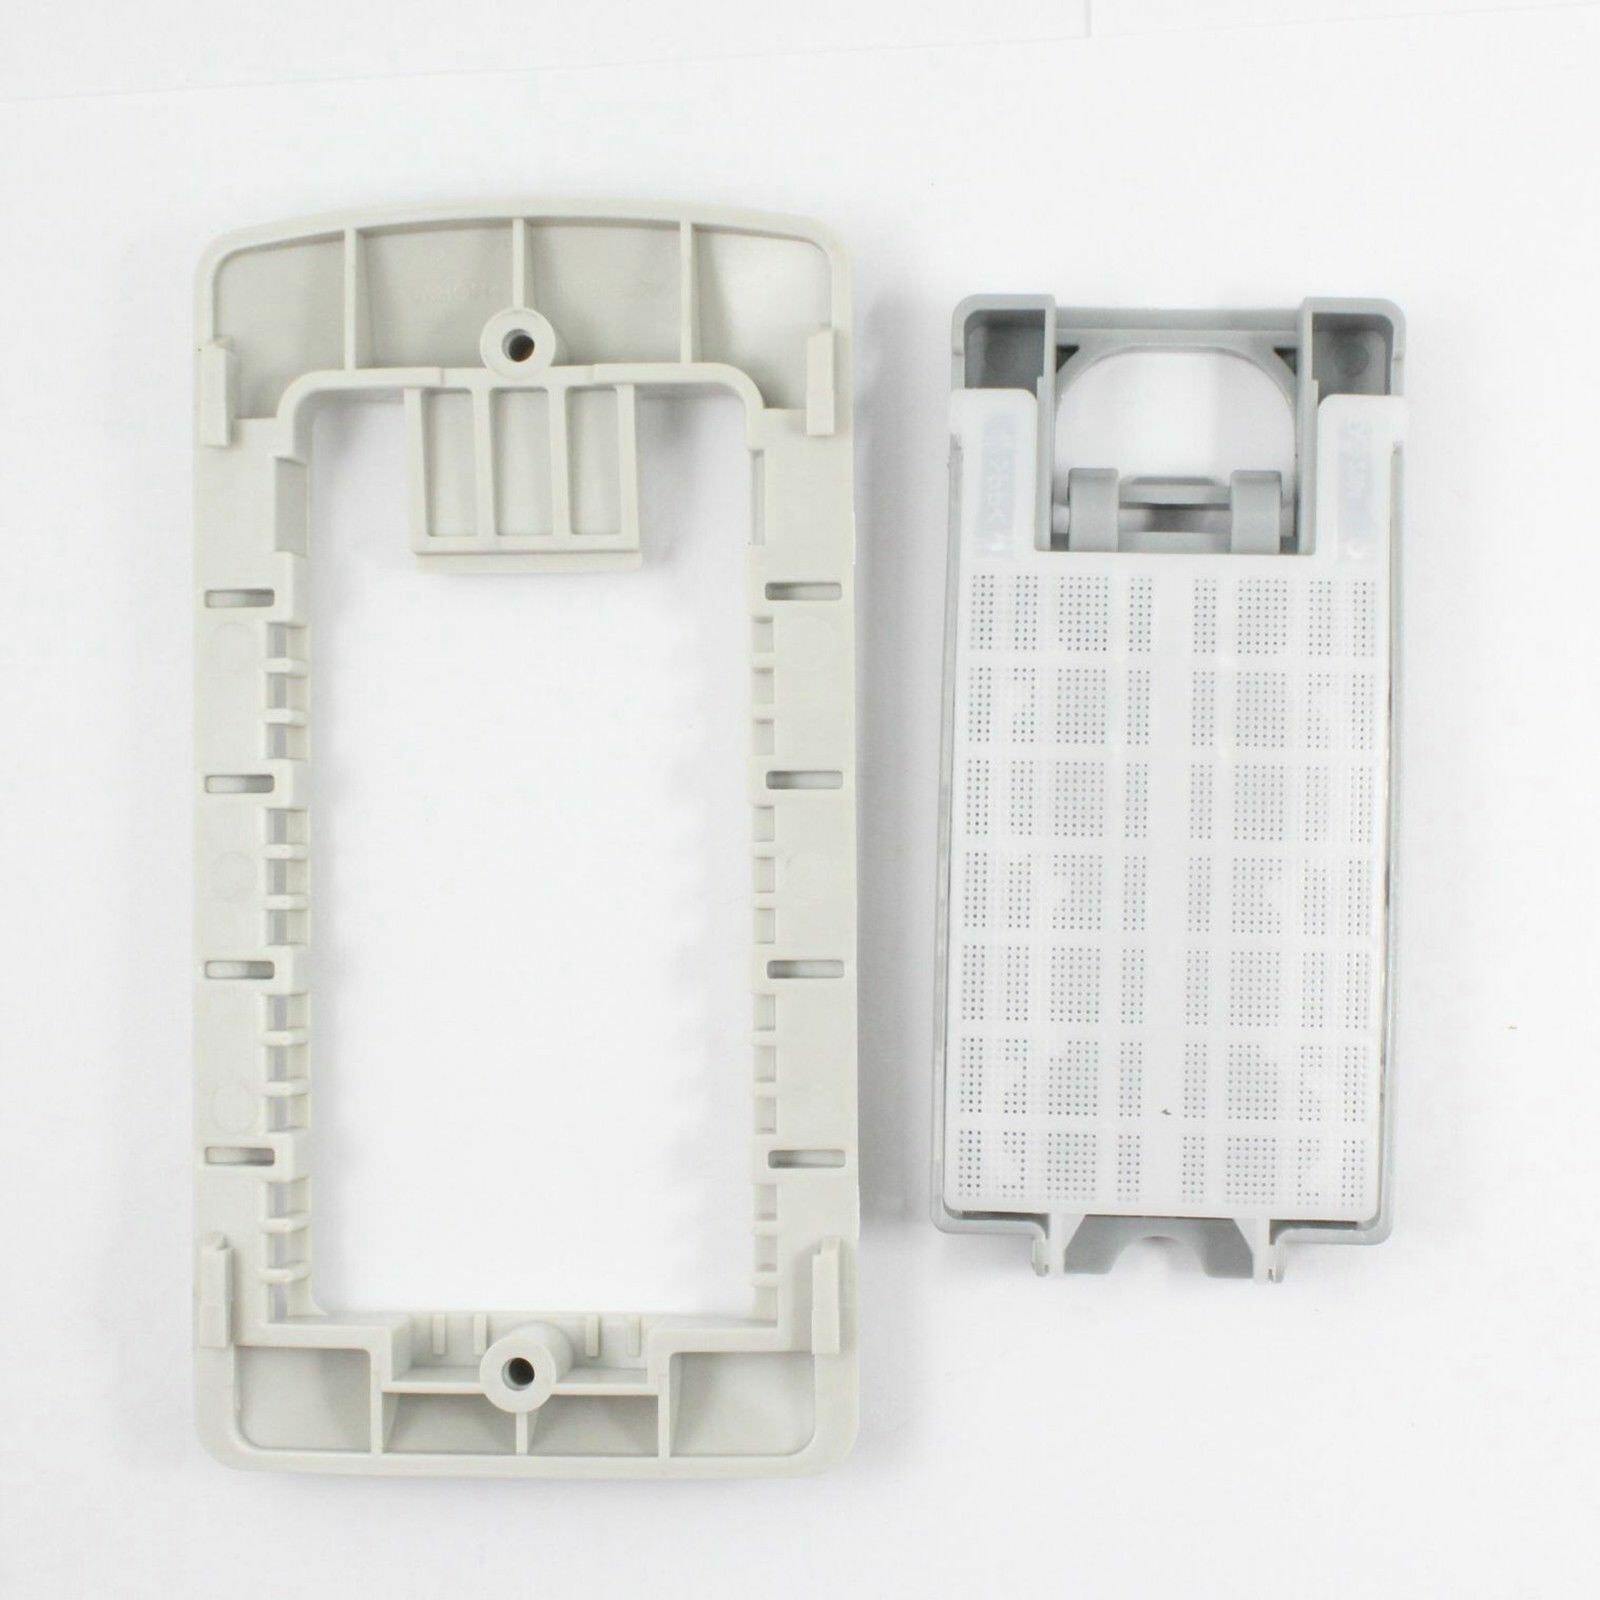 Washing Machine Lint Filter Assembly For LG WT-H8006 WT-H9506 WT-H9556 Sparesbarn